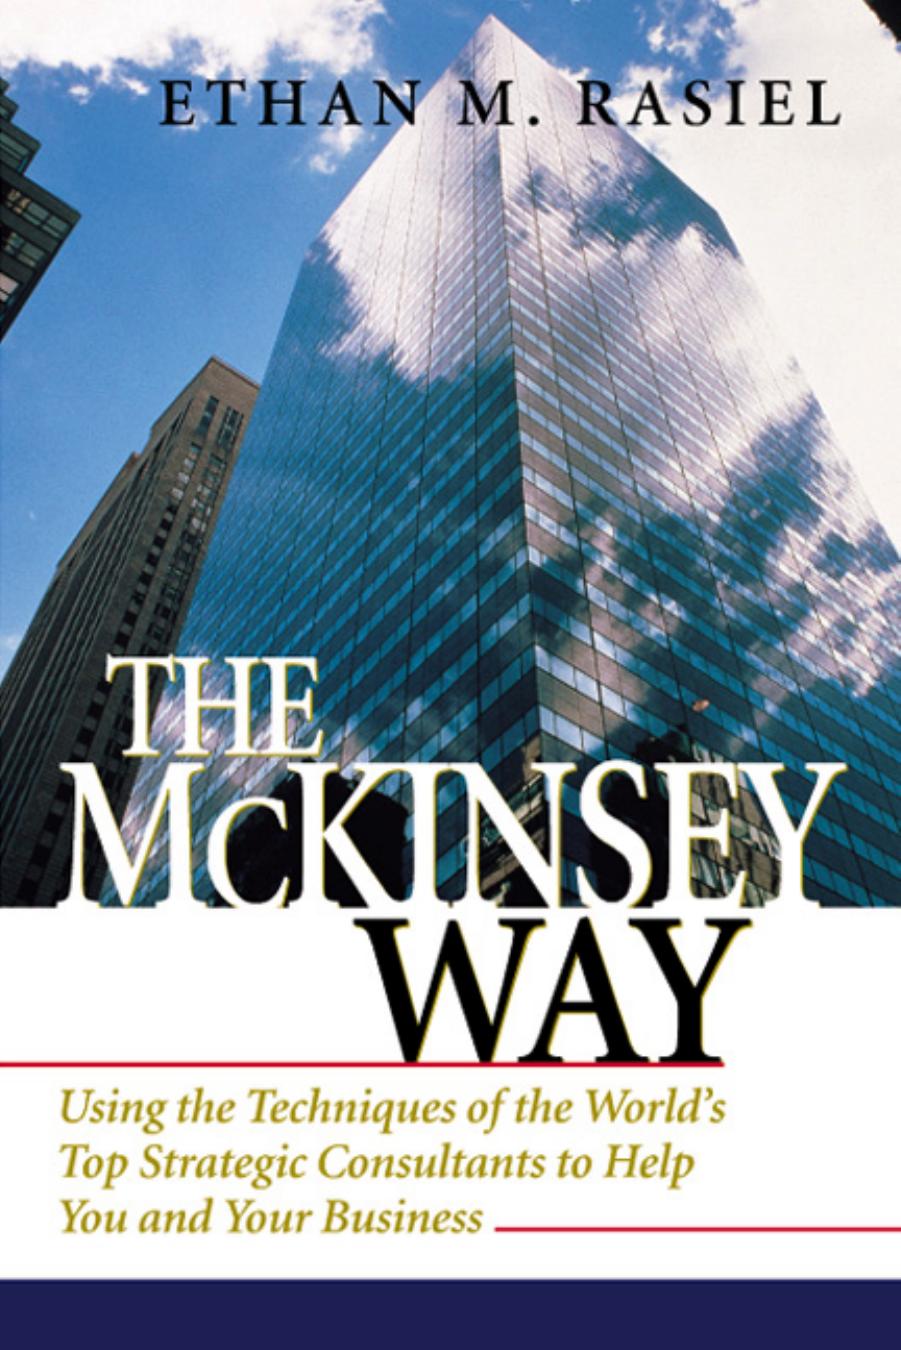 The McKinsey Way: Using the Techniques of the World's Top Strategic Consultants to Help You and Your Business